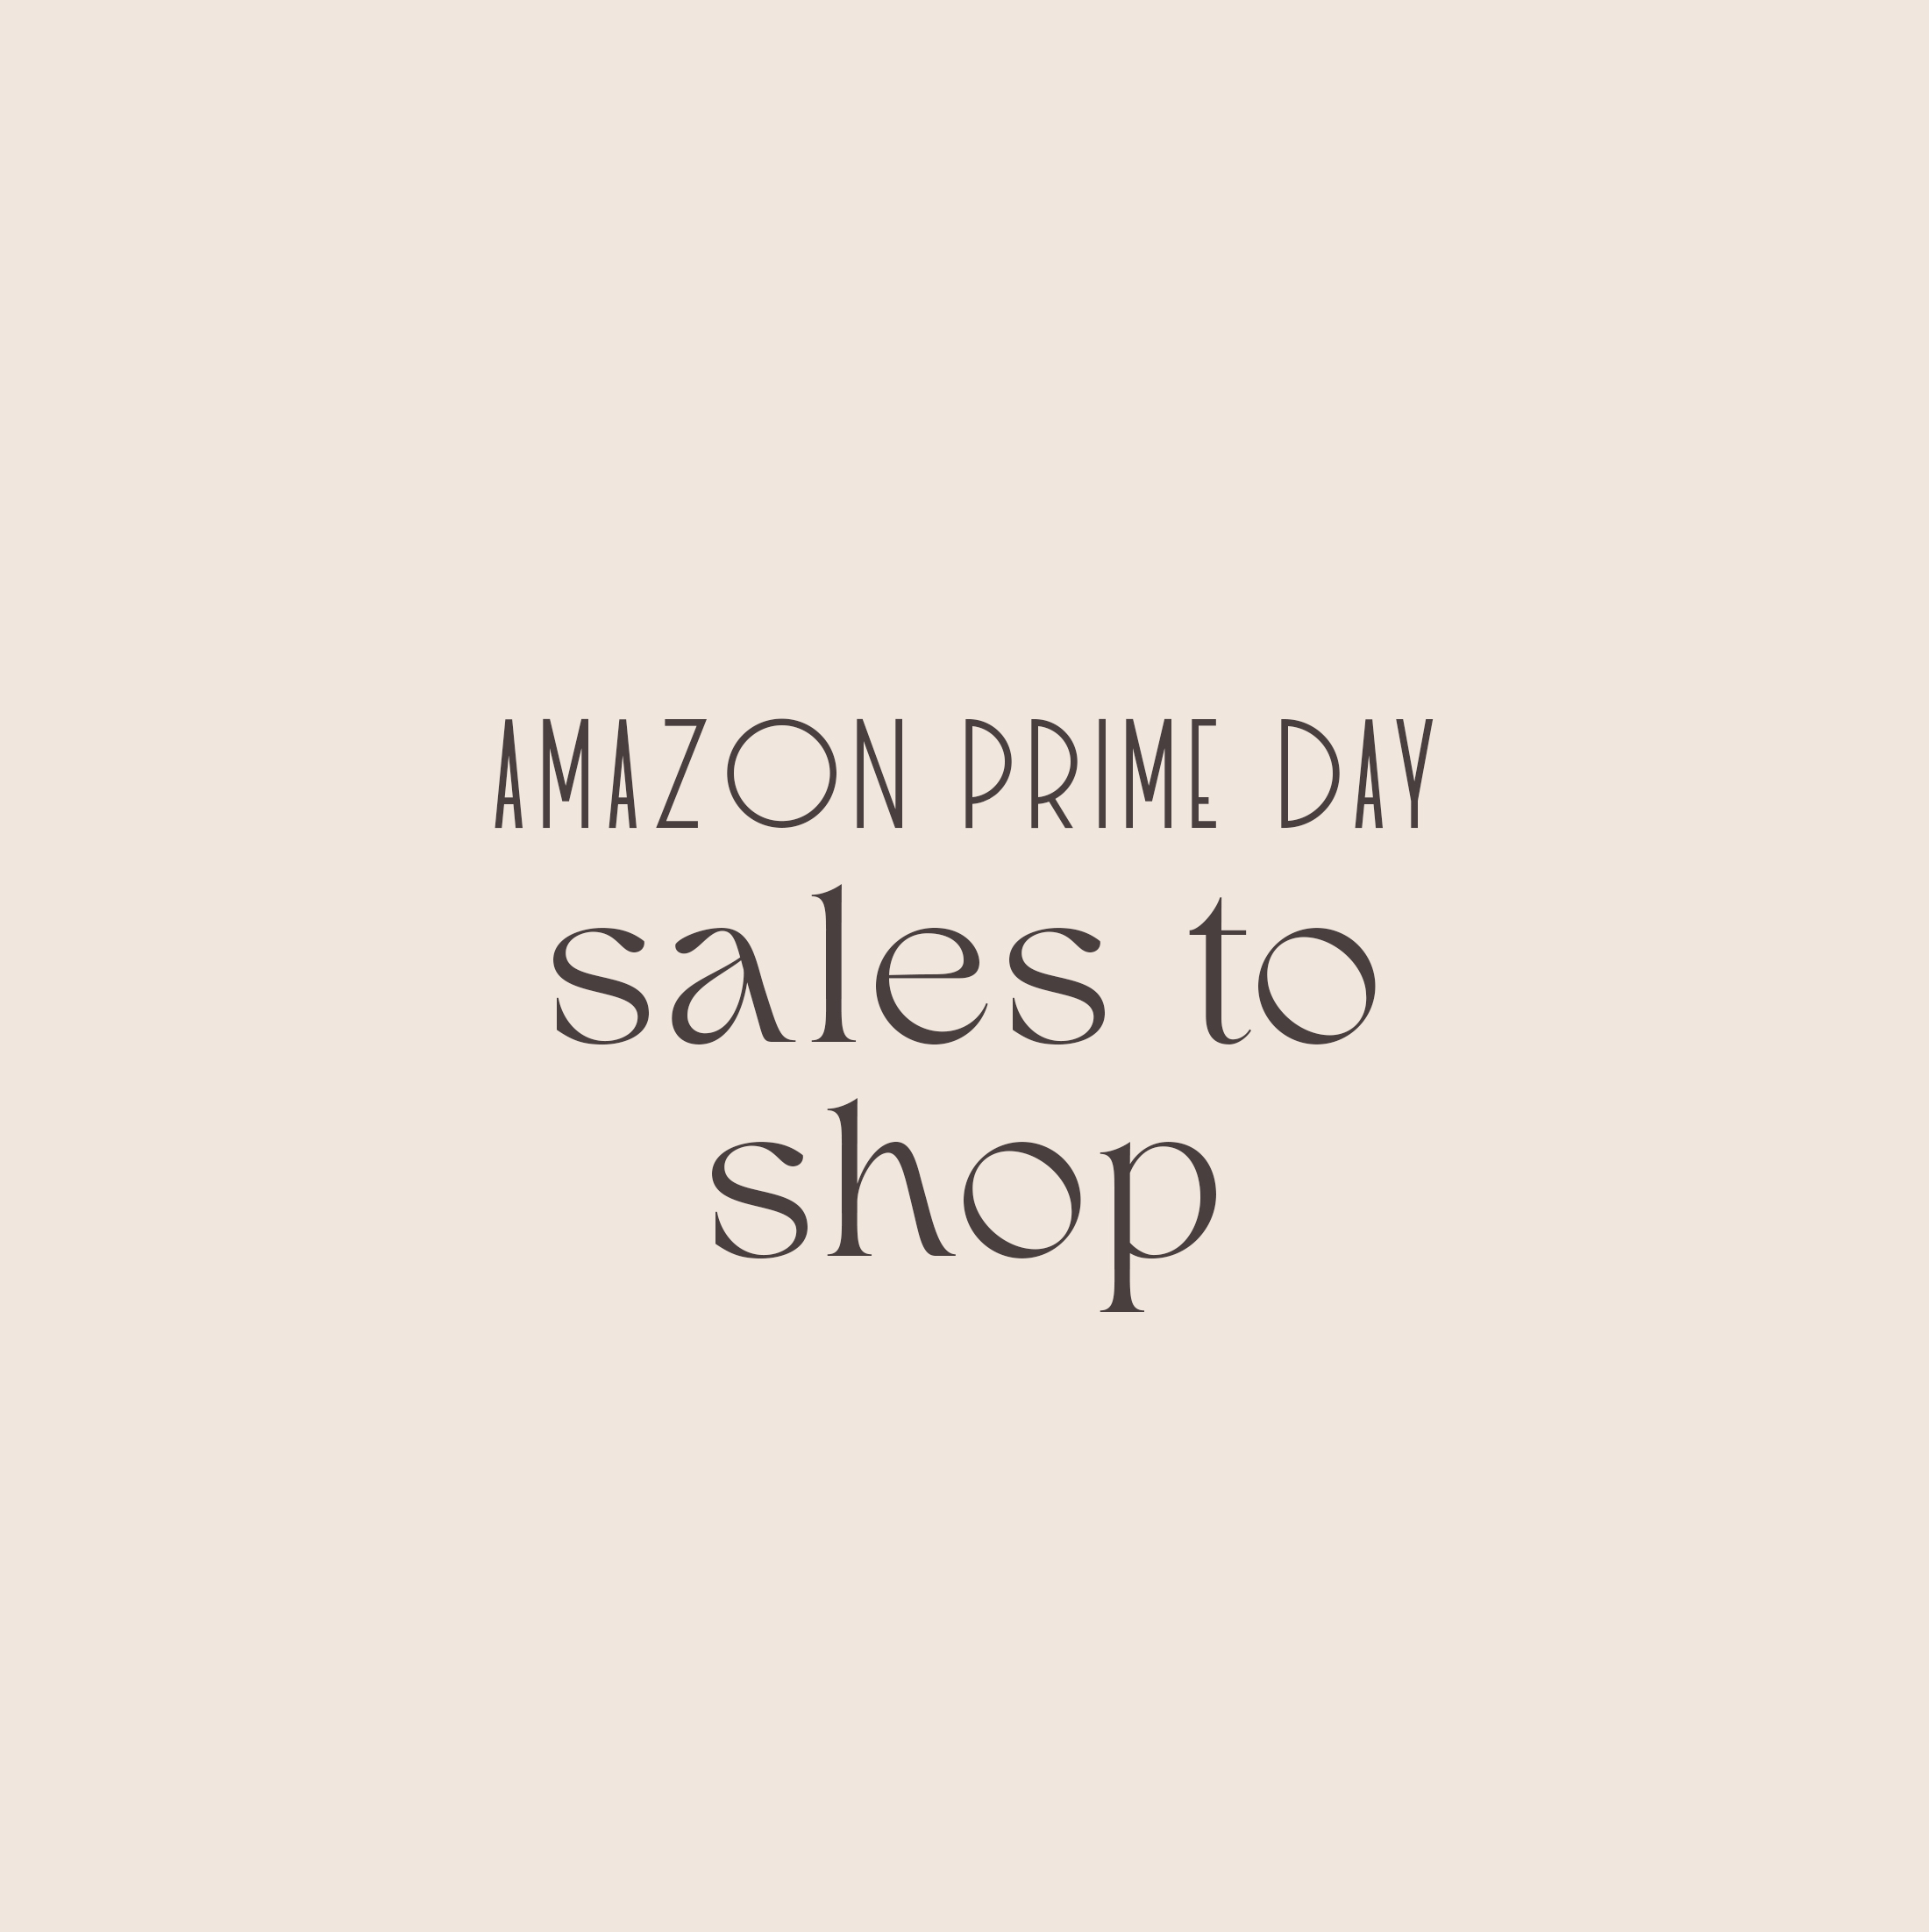 prime day sales to shop – almost makes perfect